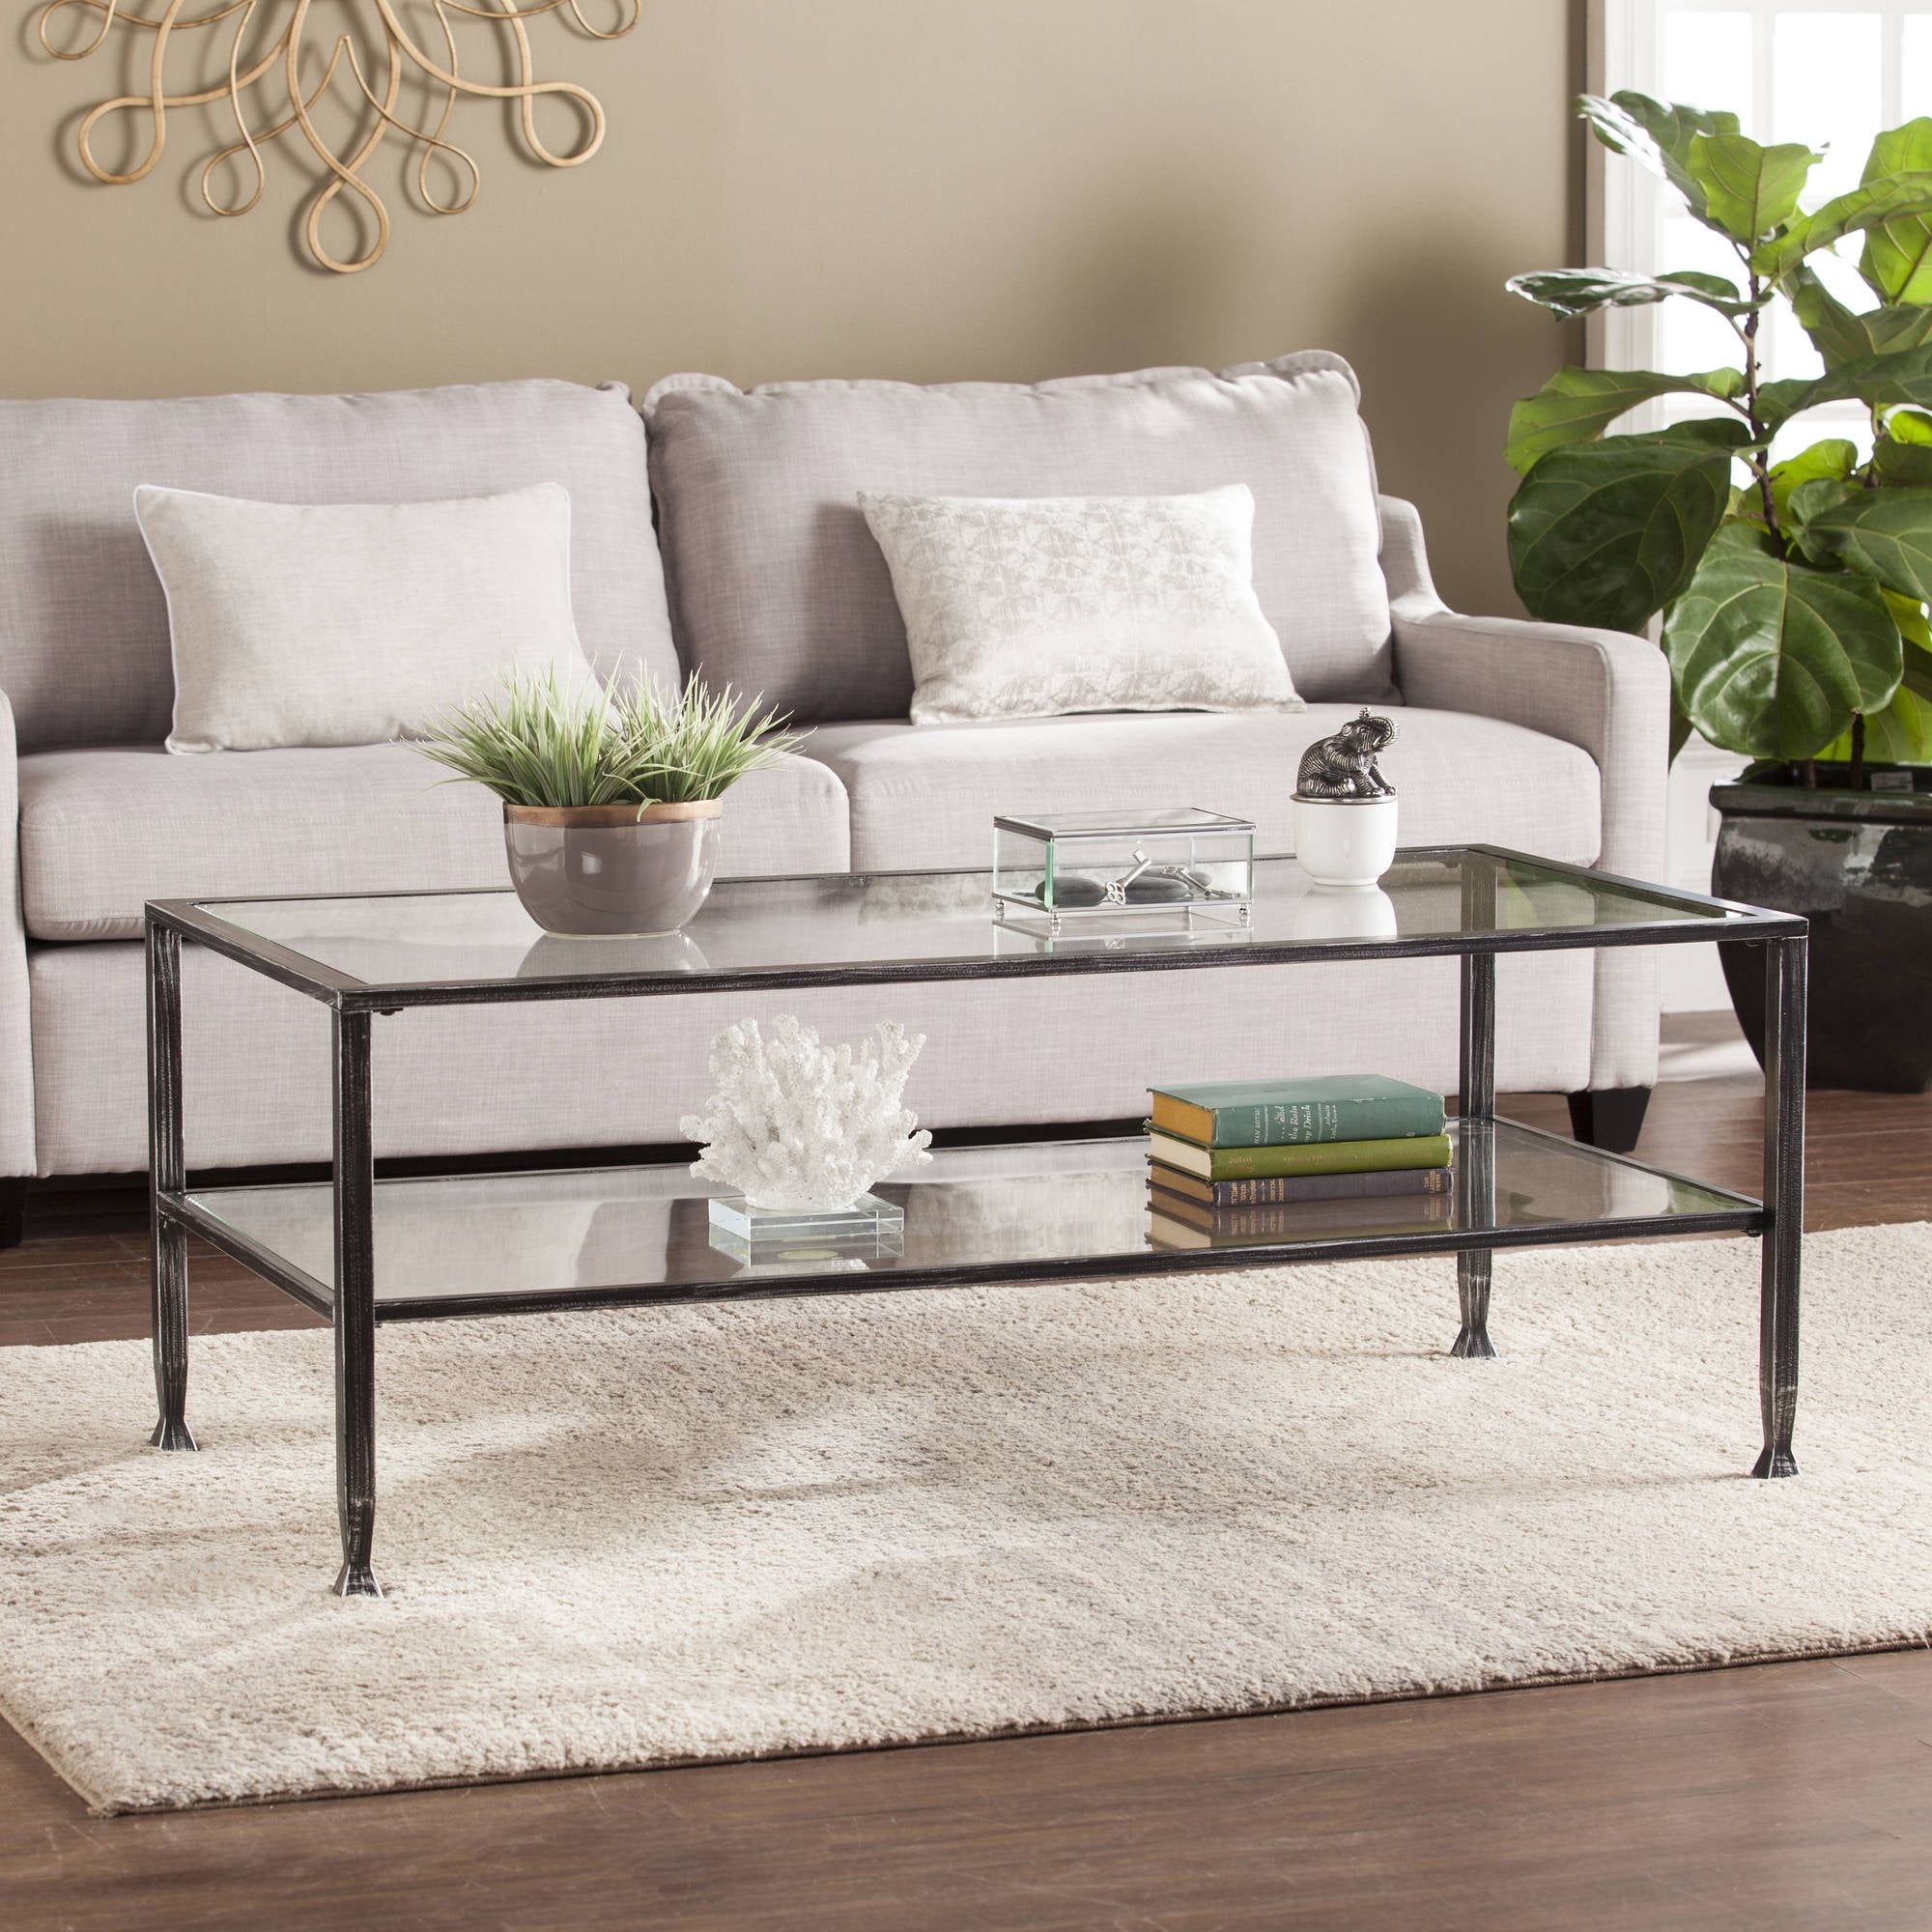 Jumpluff Metal/glass Rectangular Open Shelf Coffee Table, Distressed With Coffee Tables With Open Storage Shelves (View 7 of 15)